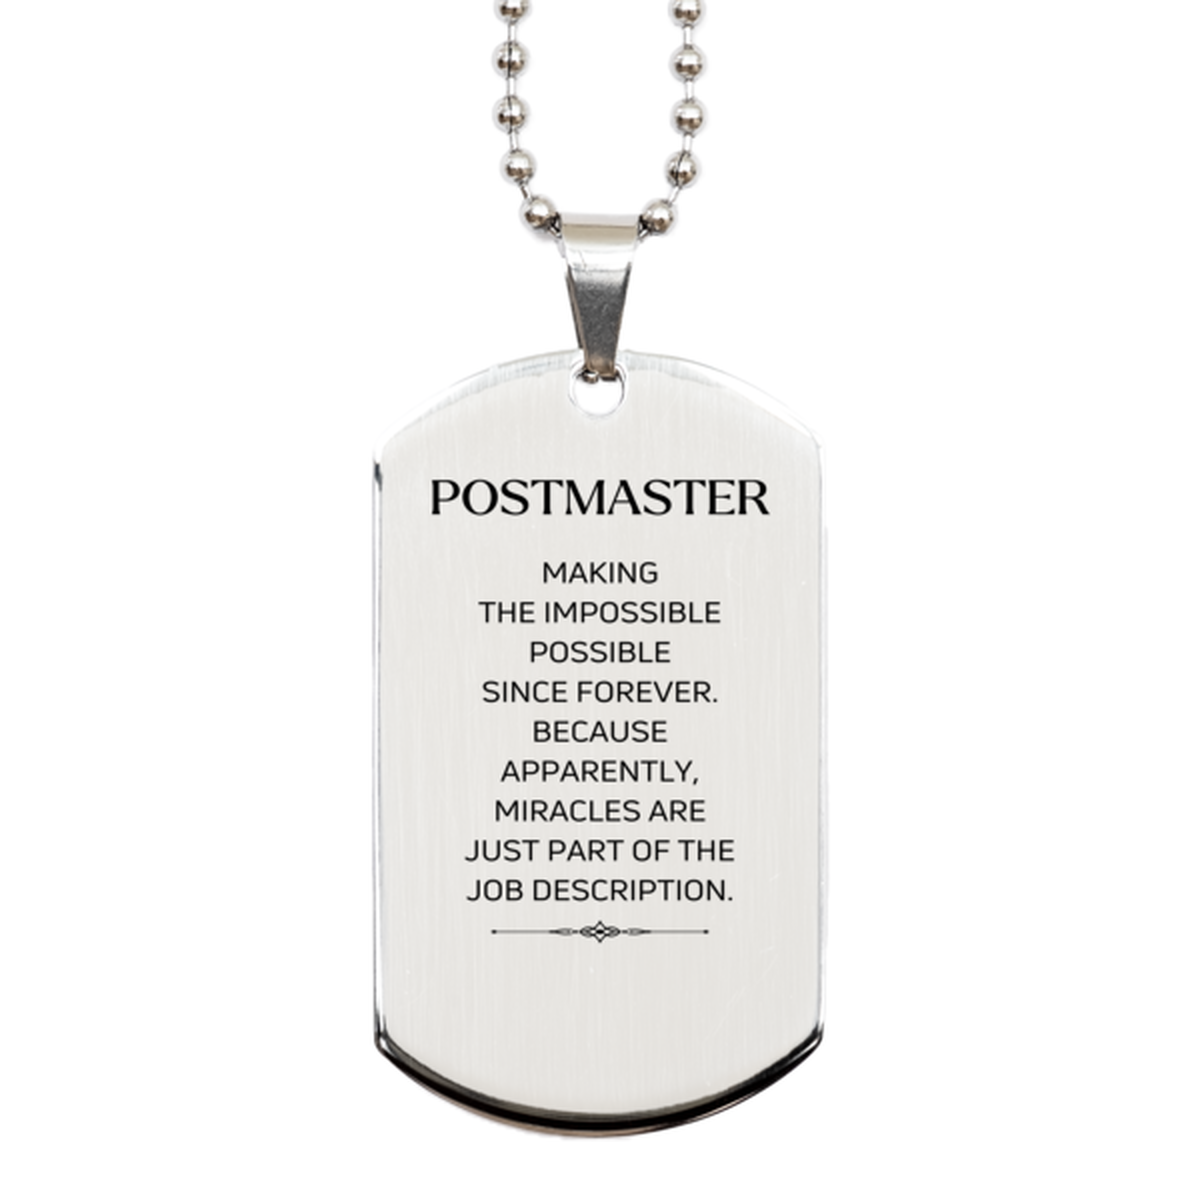 Funny Postmaster Gifts, Miracles are just part of the job description, Inspirational Birthday Silver Dog Tag For Postmaster, Men, Women, Coworkers, Friends, Boss